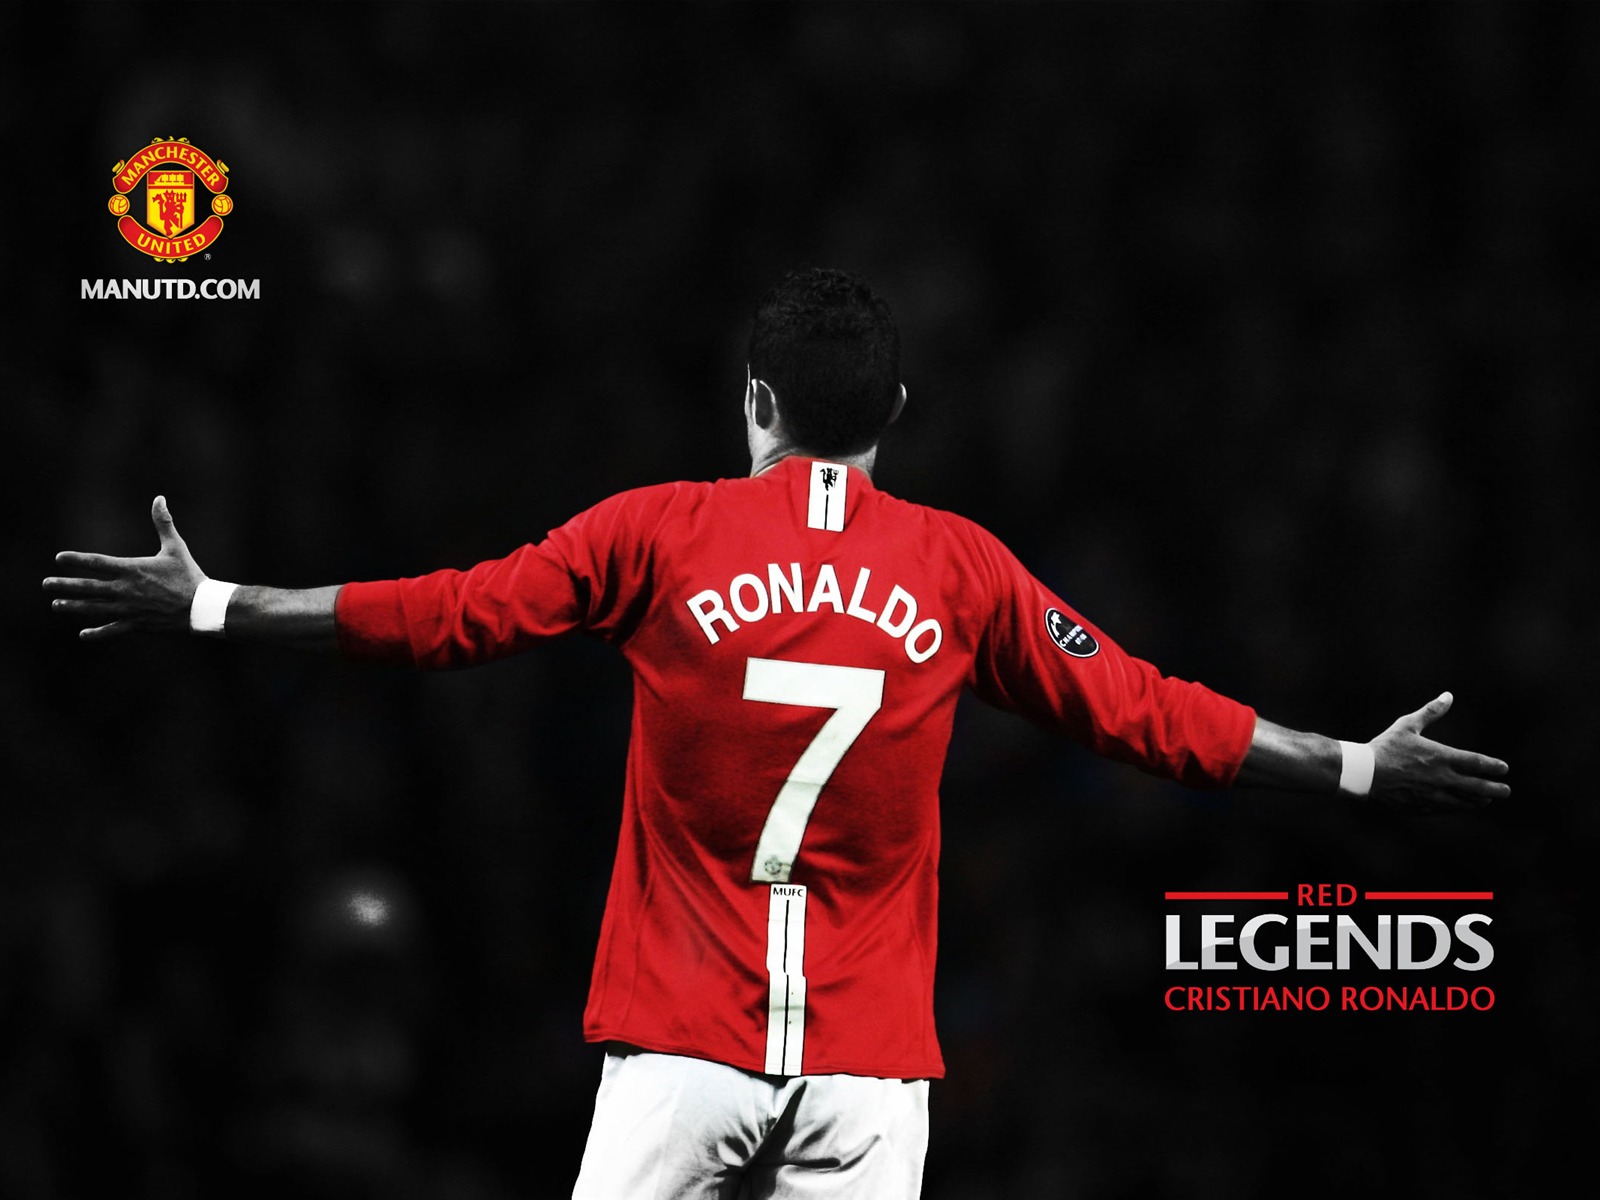 best manchester united wallpapers,player,football player,jersey,sports,team sport